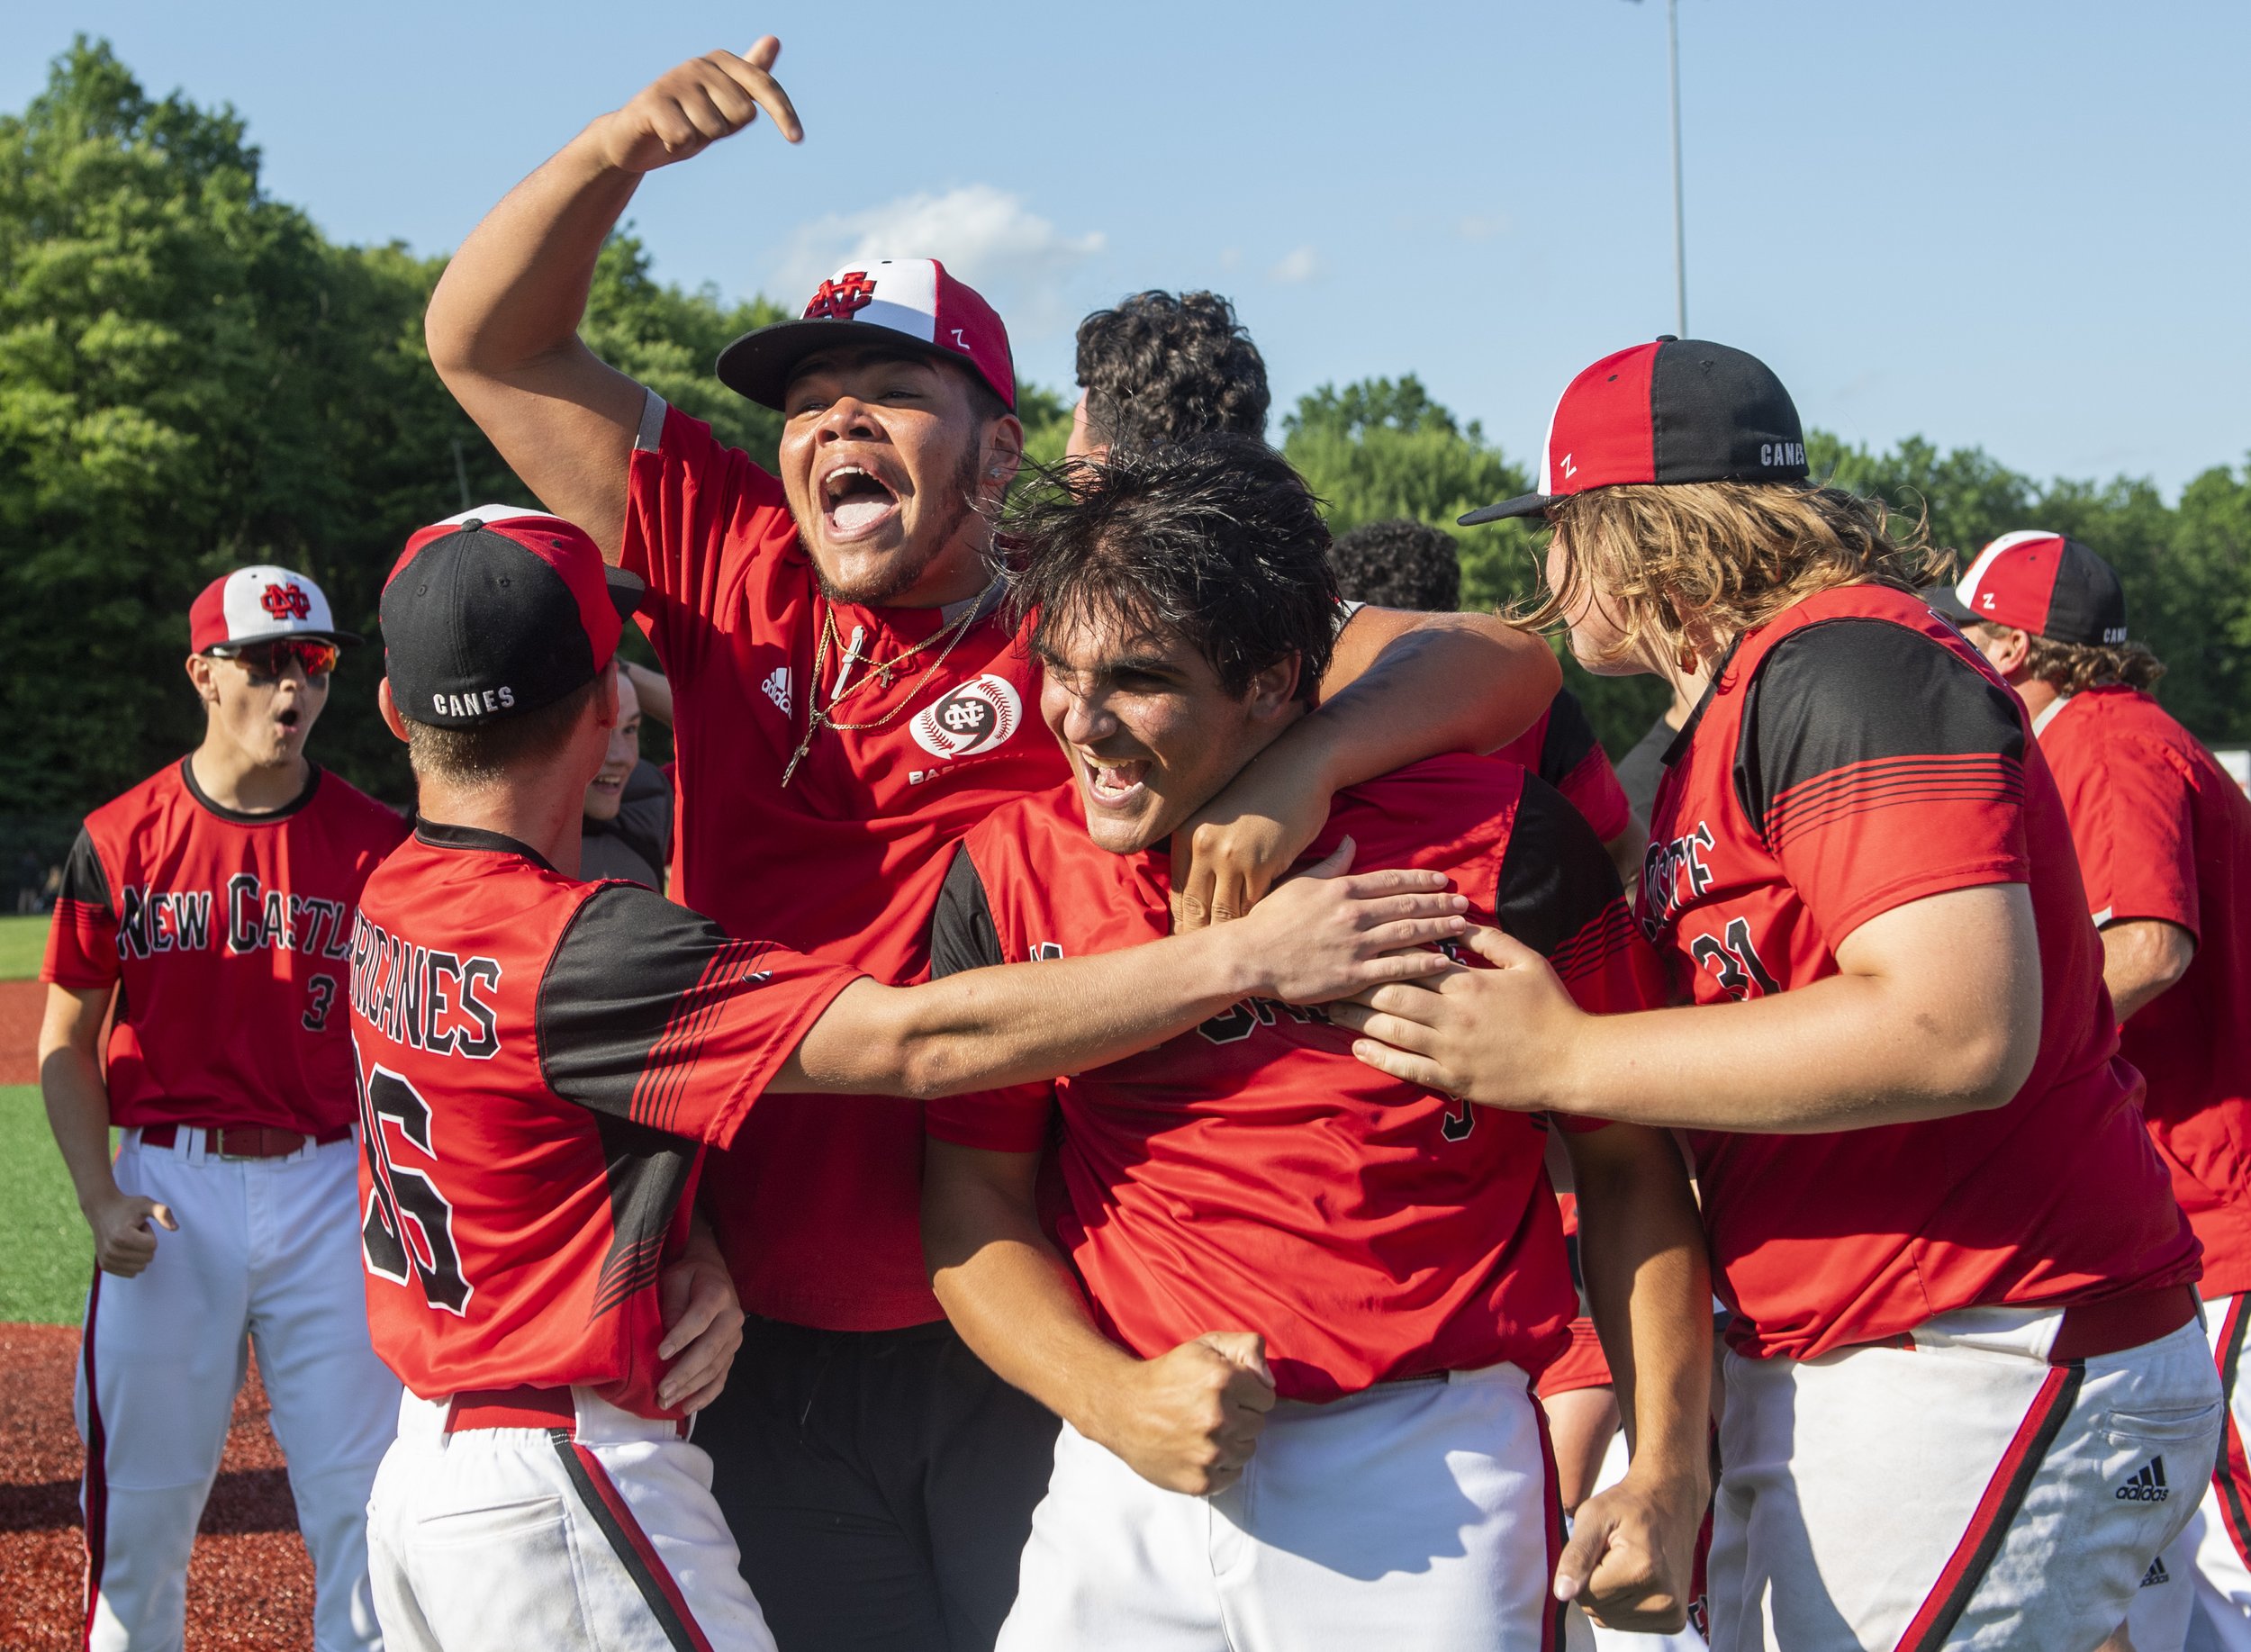  New Castle pitcher Anthony Miller, center, celebrates with his teammates after their 3-1 victory against Montour on Monday, June 14, 2021, at Neshannock High School in New Castle, Pa. (Emily Matthews/Post-Gazette)  